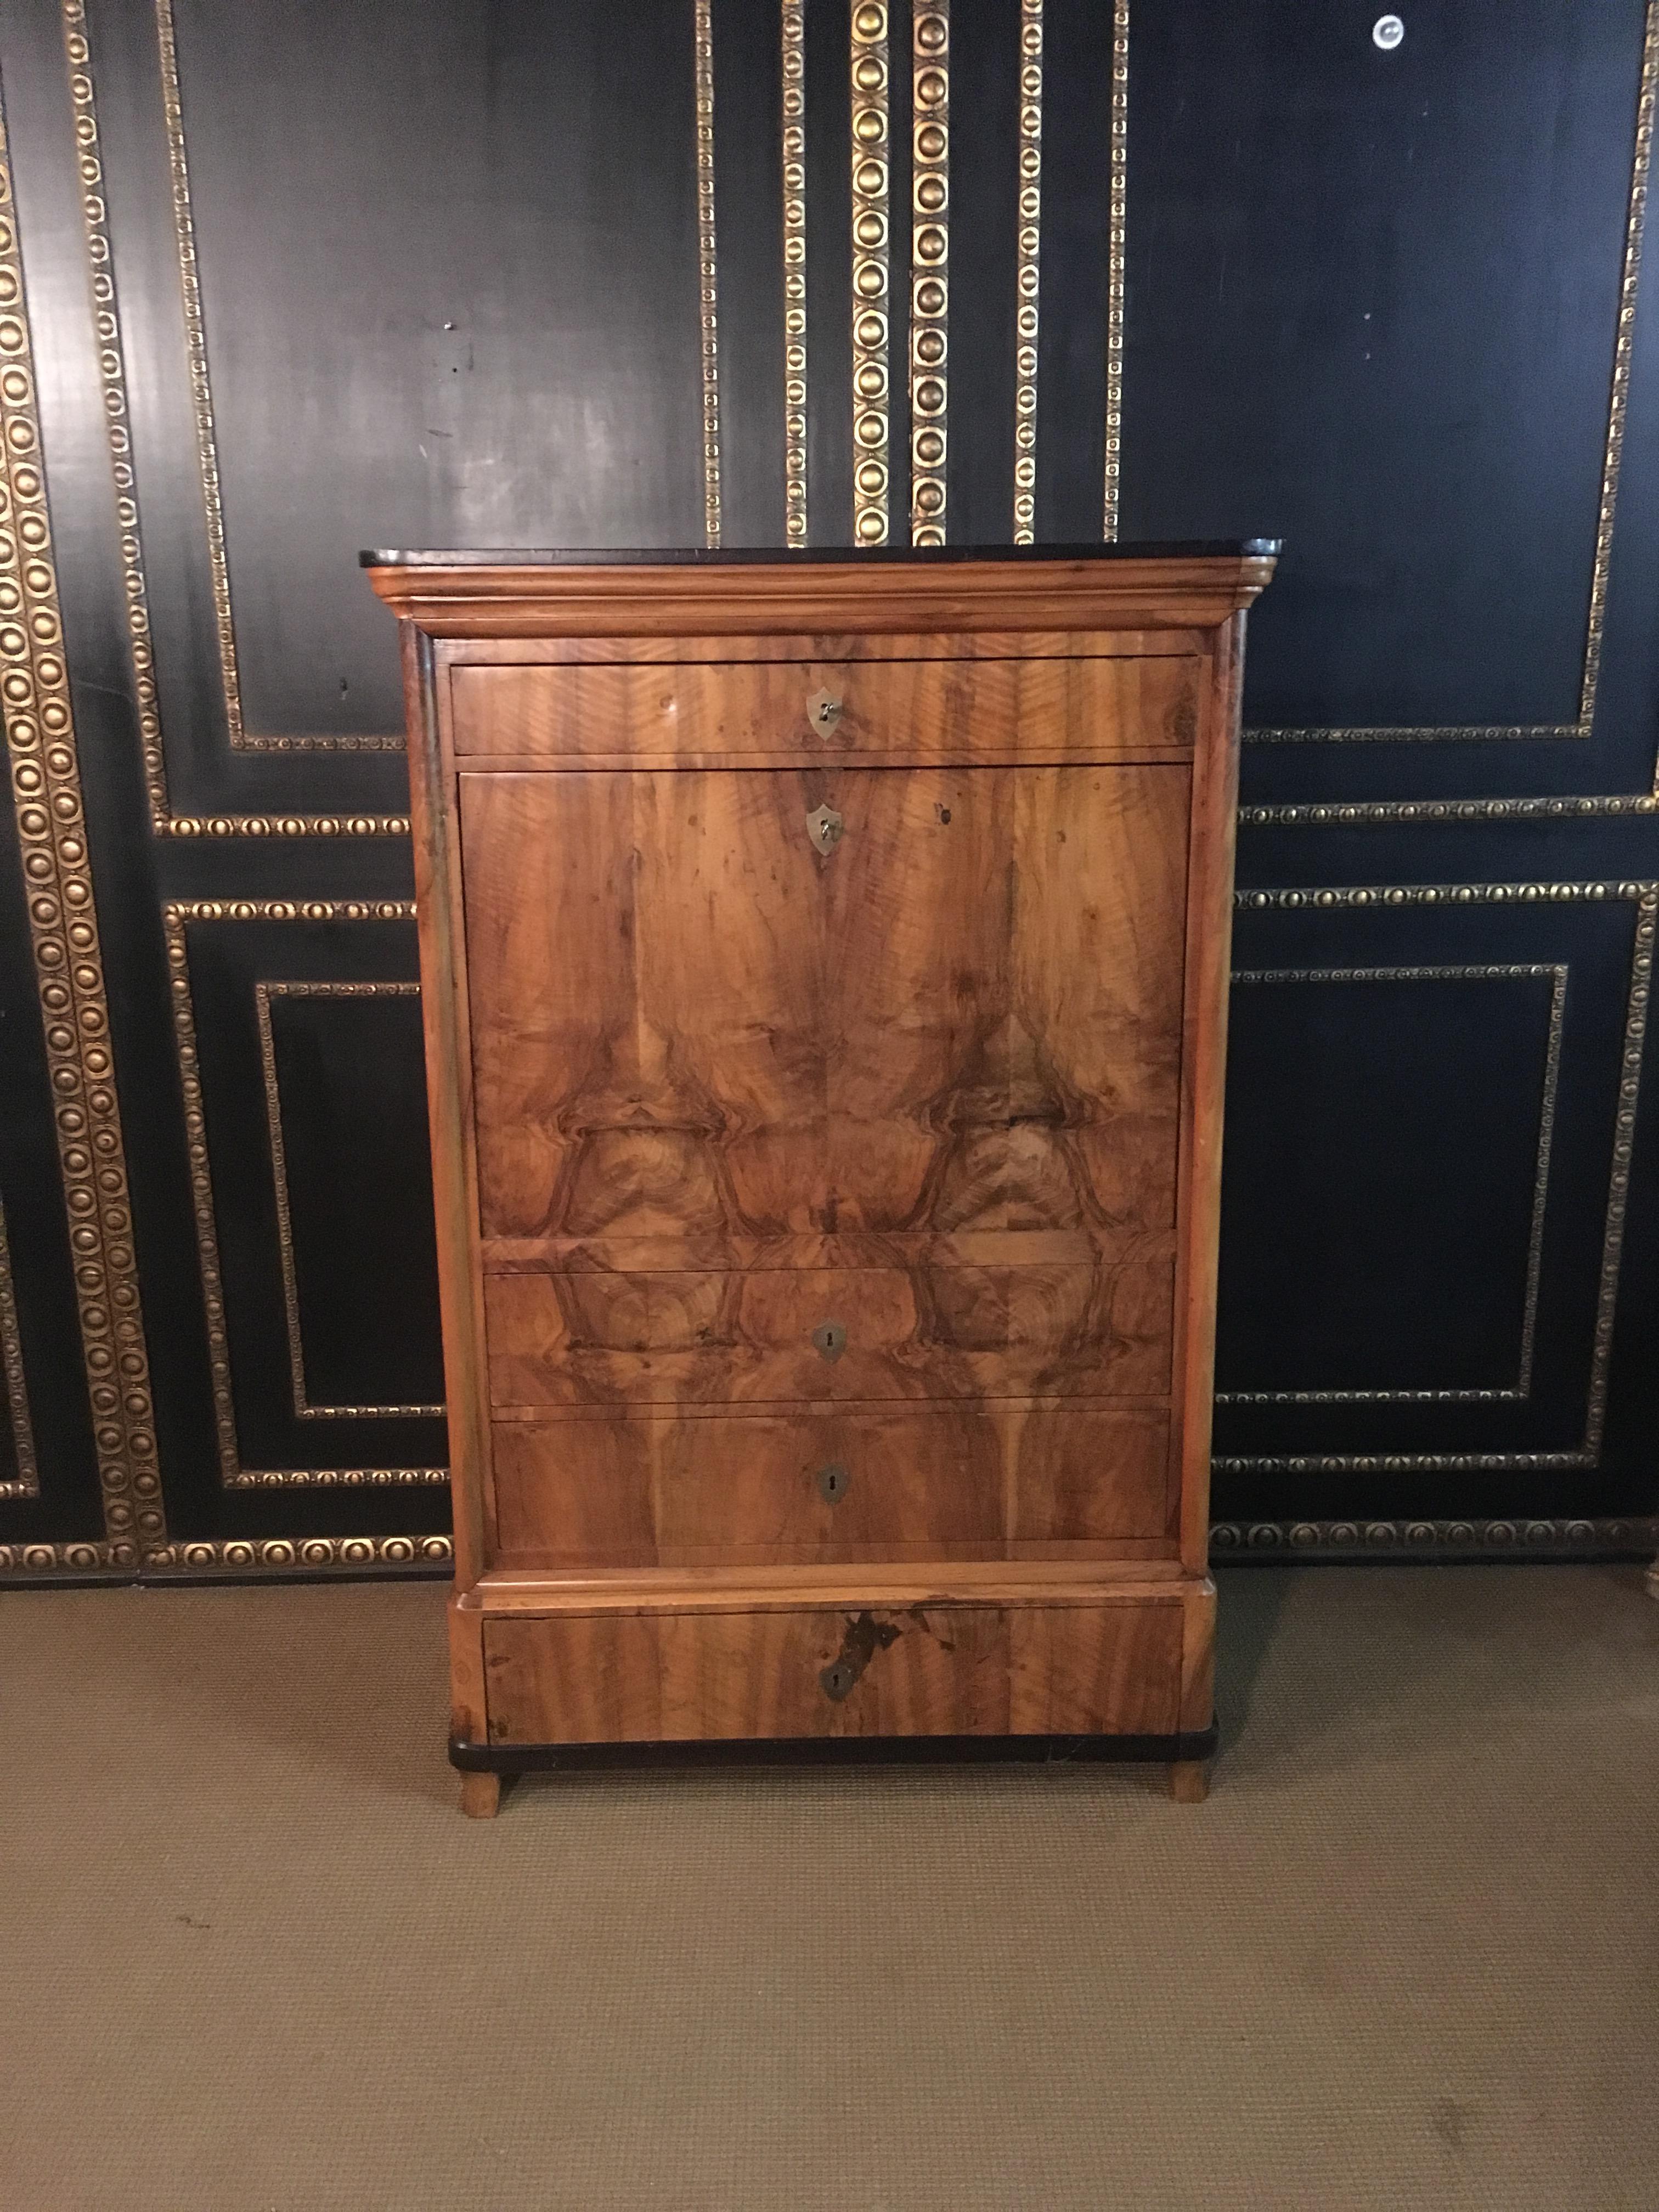 Beautiful walnut root veneer.
Above a drawer,
Below the plate 3 drawers.
Behind the writing area are also several drawers.
The writing surface was blackened.
The upper shelf was also made black.